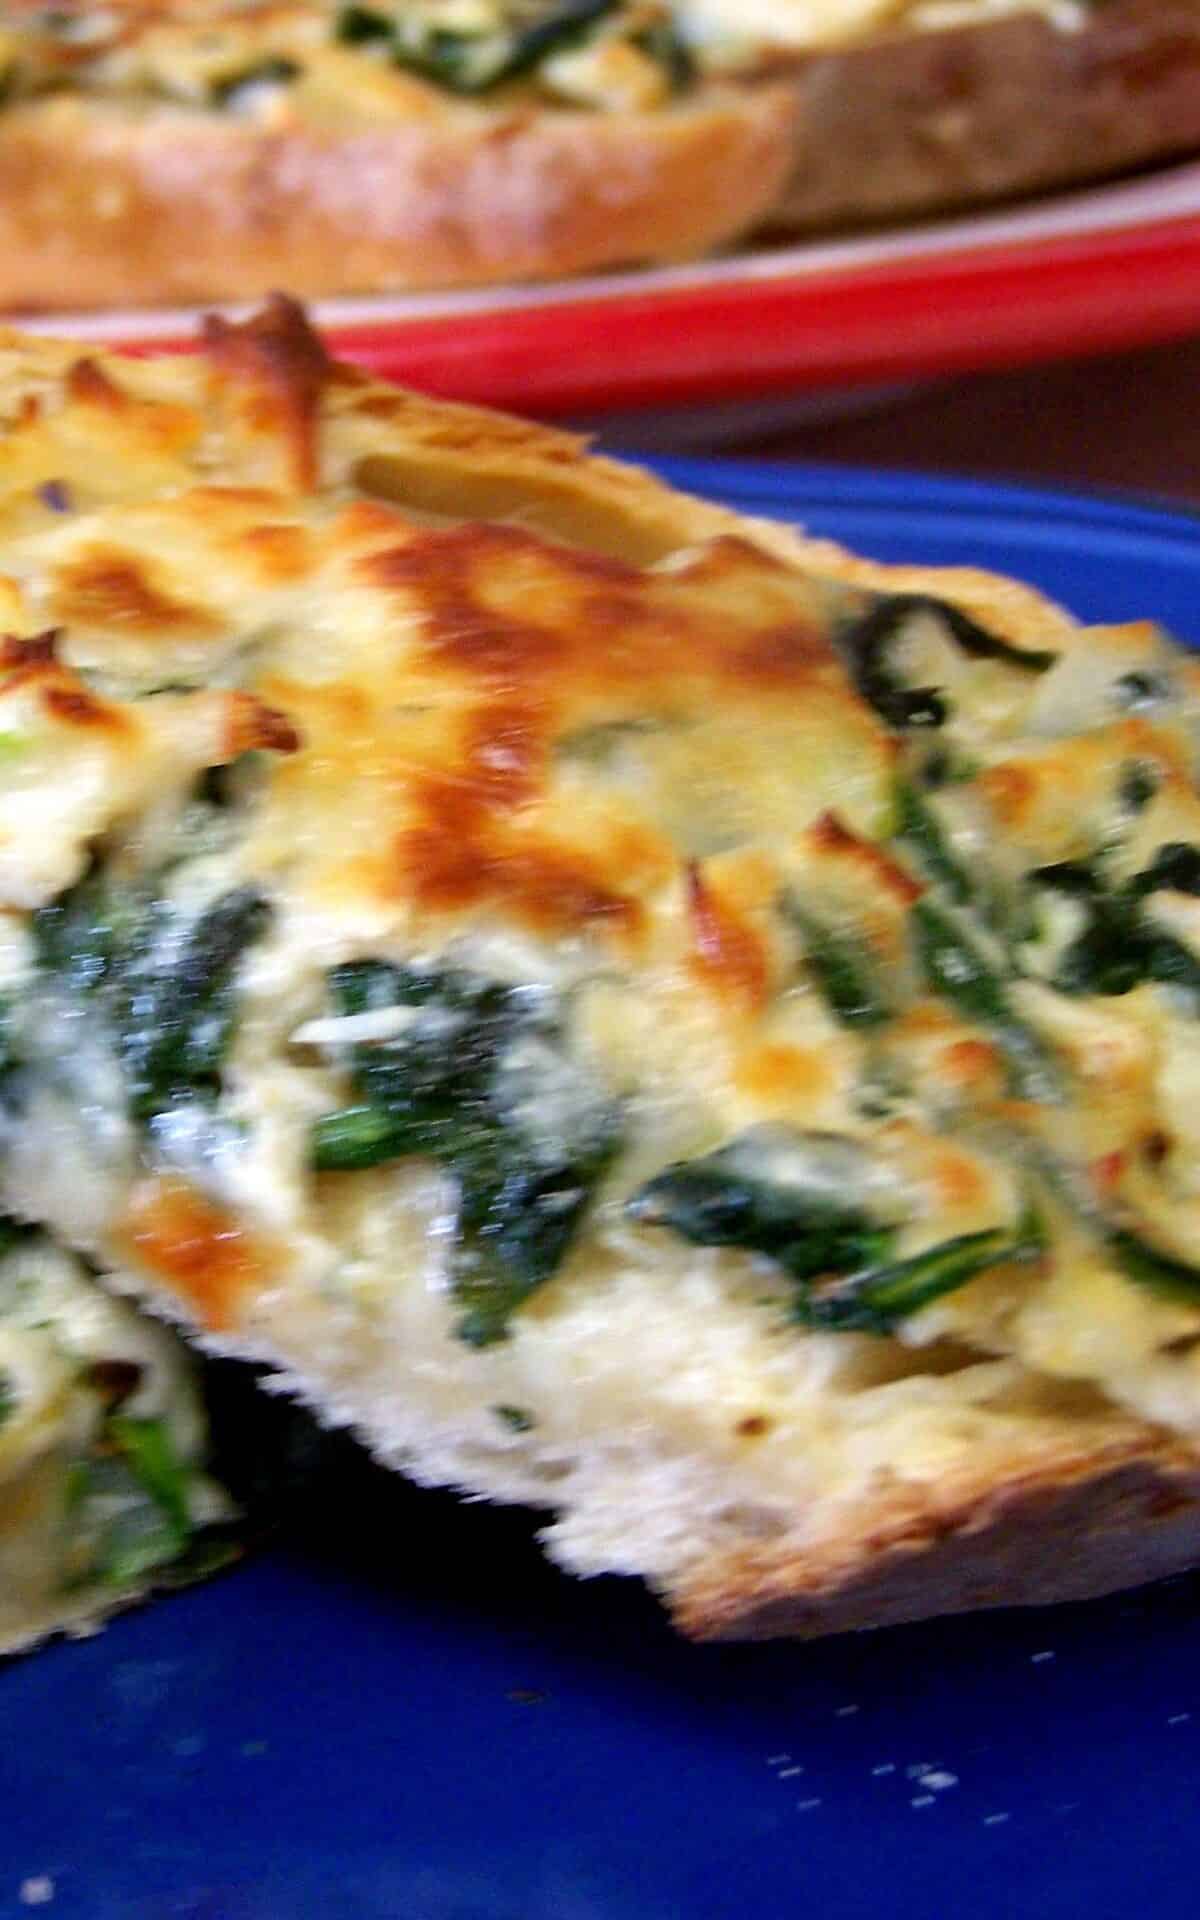  Savory crab and spinach topping